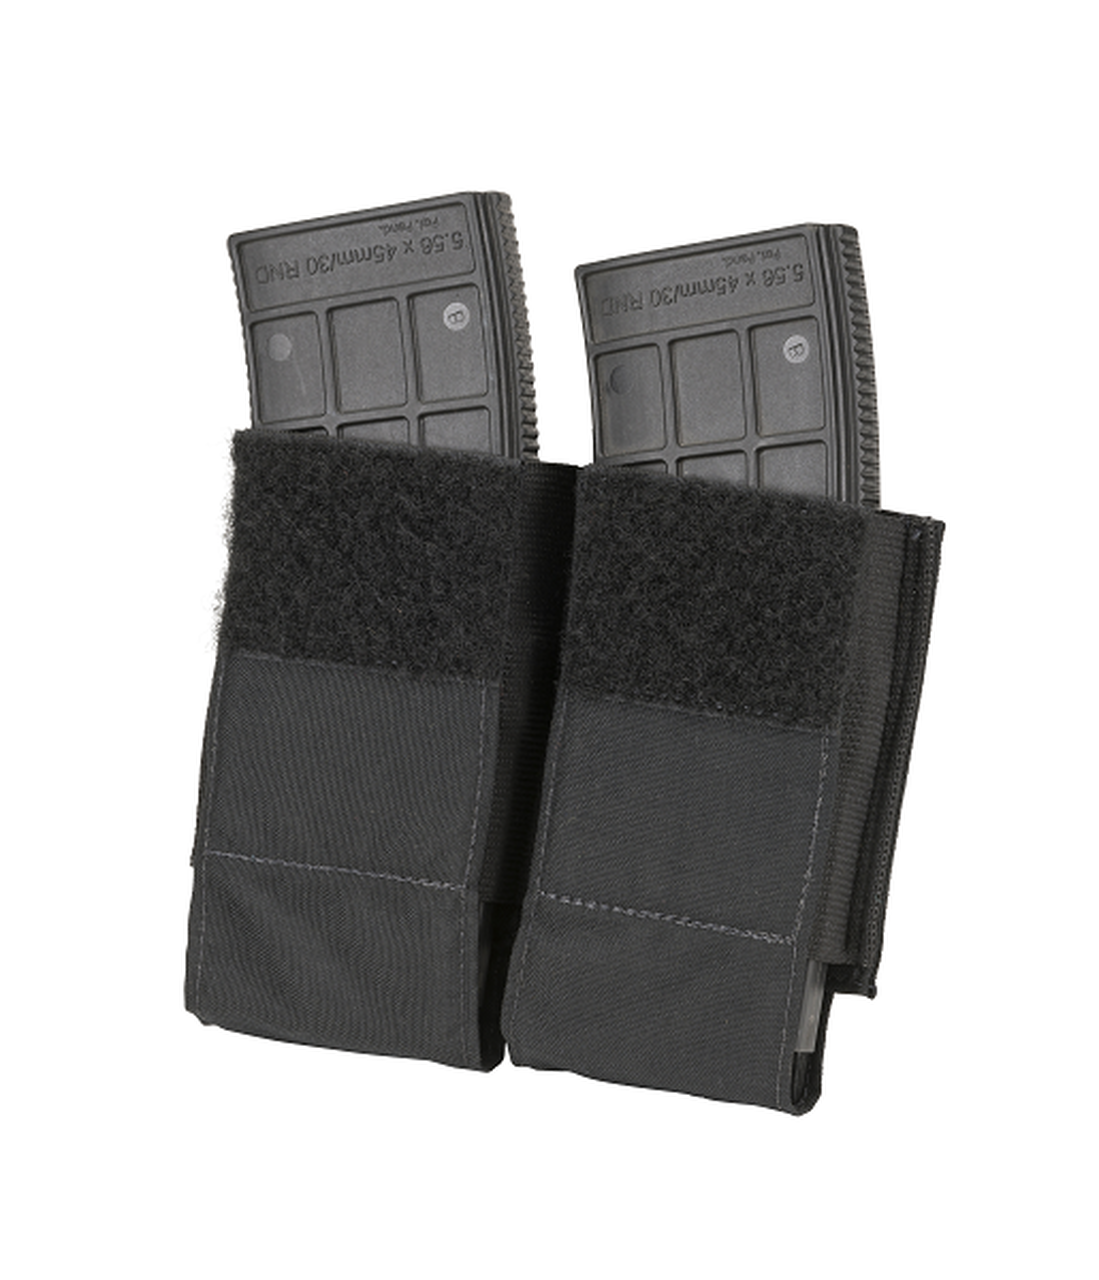 A pair of Shellback Tactical Banshee 2 Mag Kangaroo Pouches on a white background.